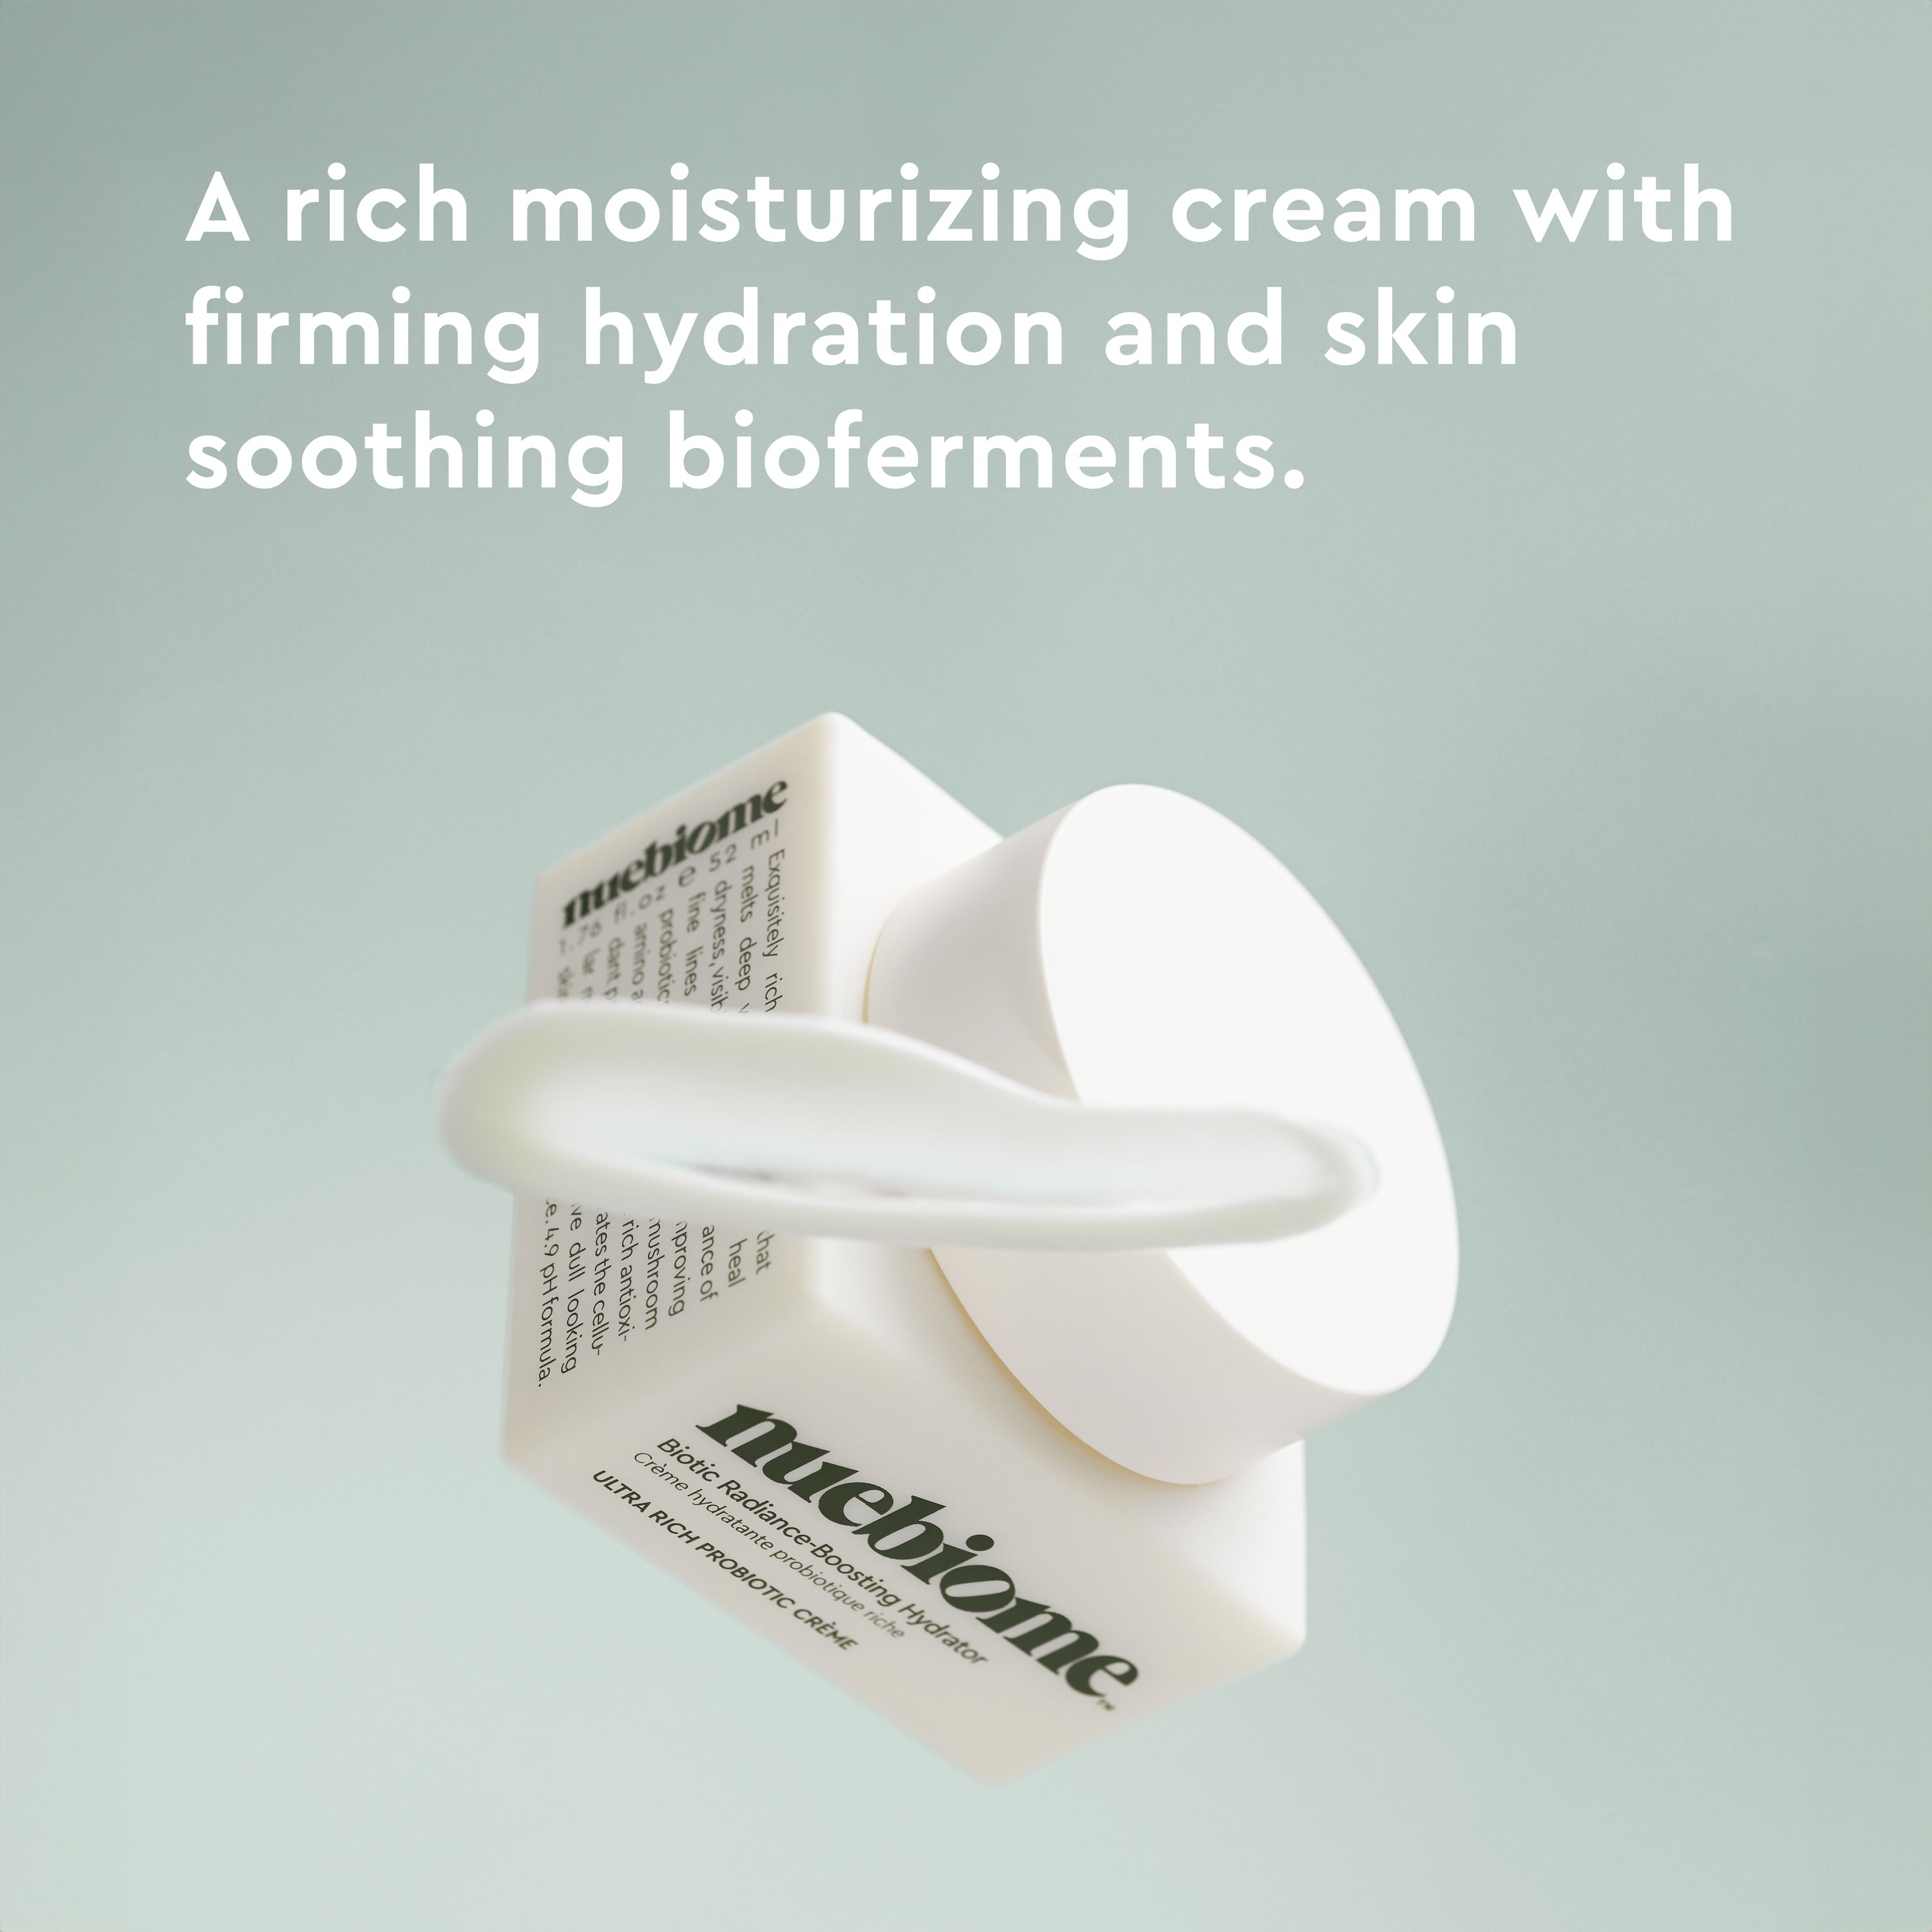 rich moisturizer for dry skin. formulated with anti-aging amino acids and plant extracts to heal dry skin 